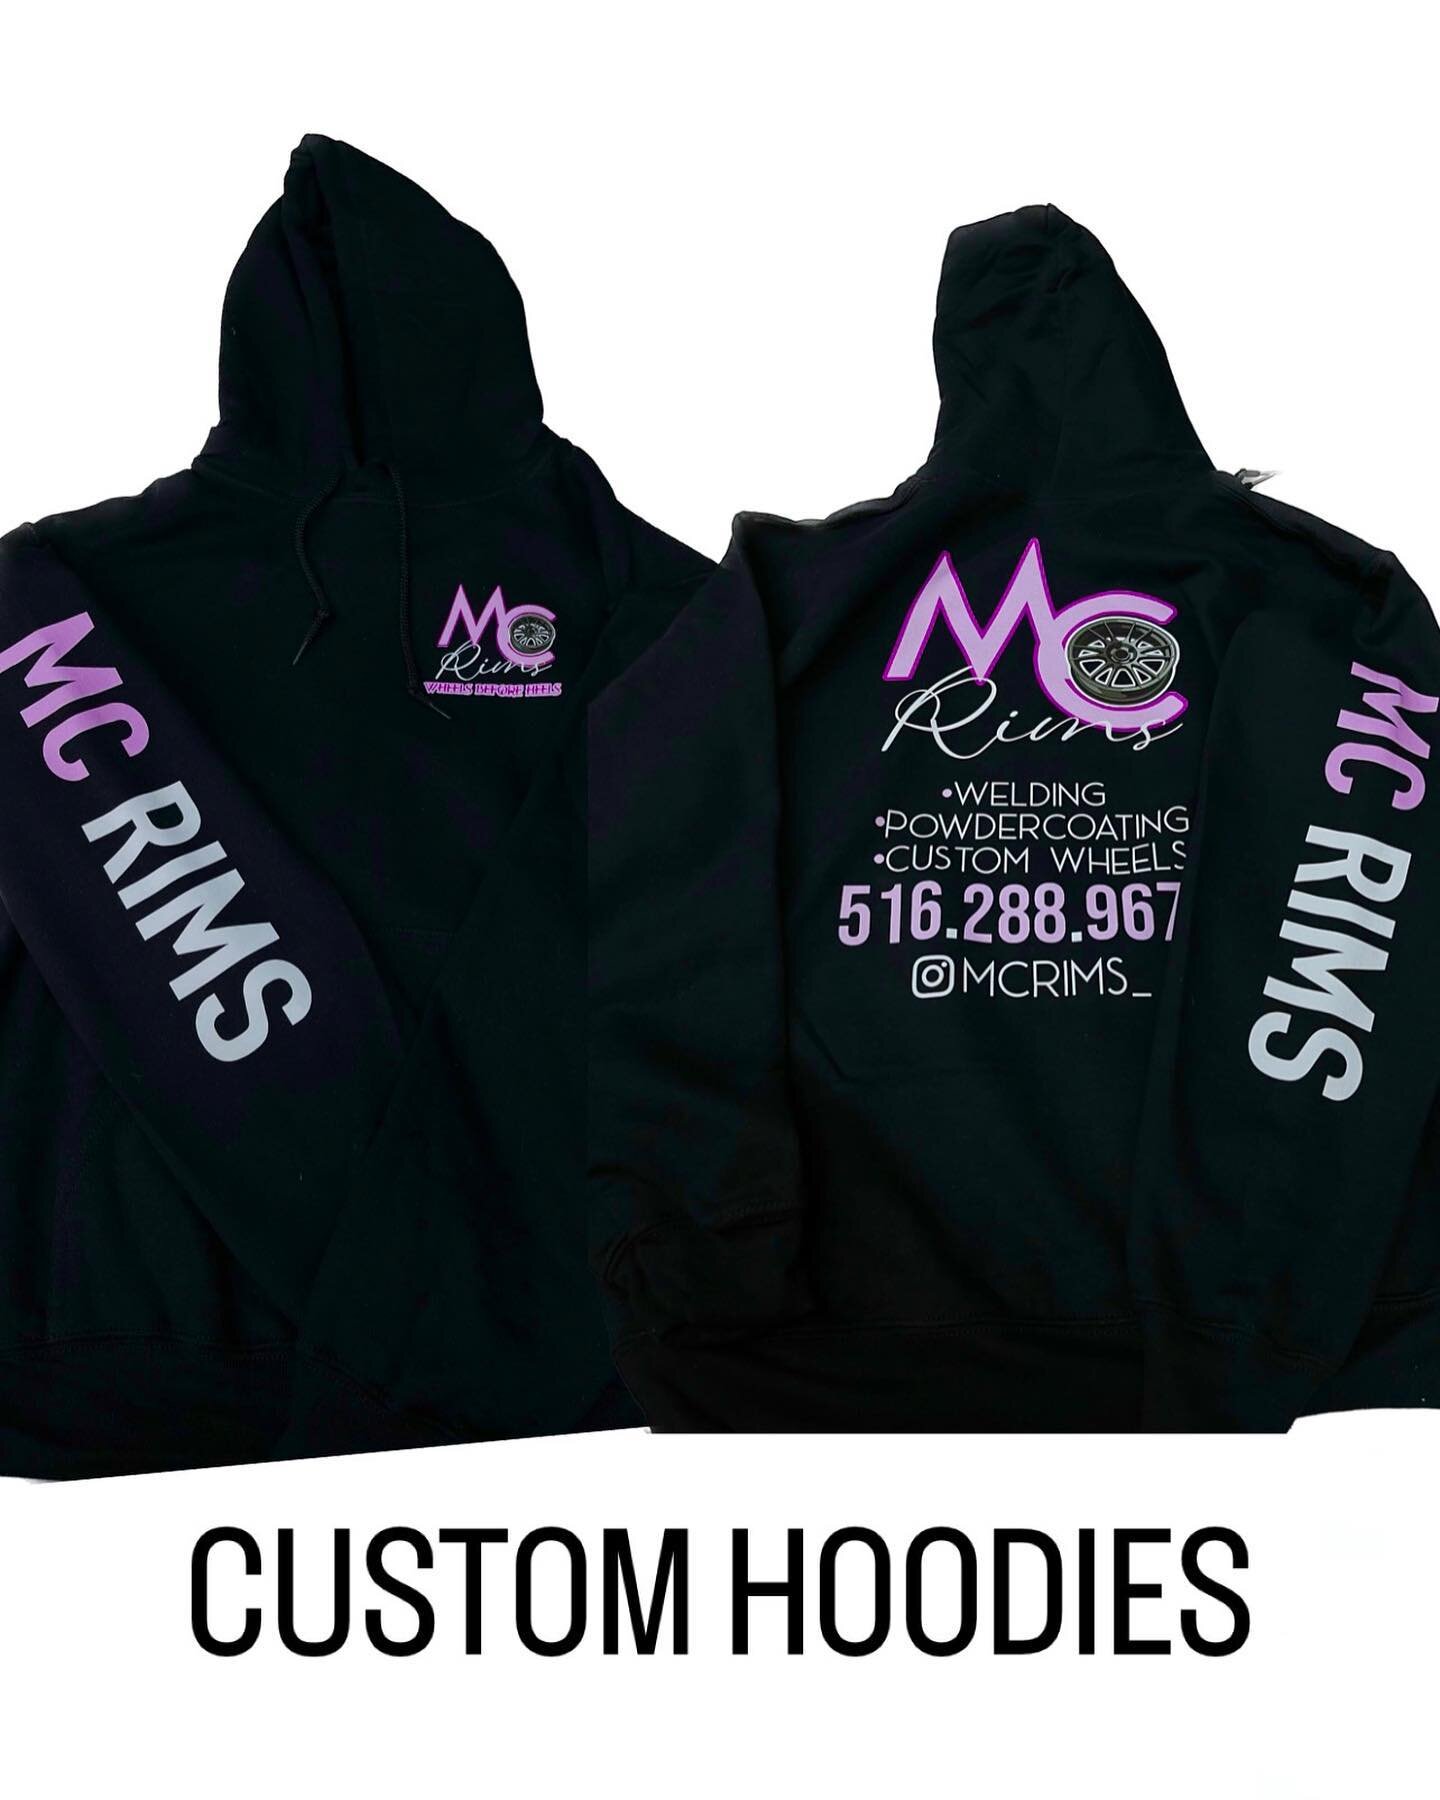 Boost Your Brand with Custom Business Hoodies!

Looking to take your business's branding to the next level? Our custom business hoodies are the perfect solution. Whether you want to create a cohesive team look, promote your brand at events, or provid